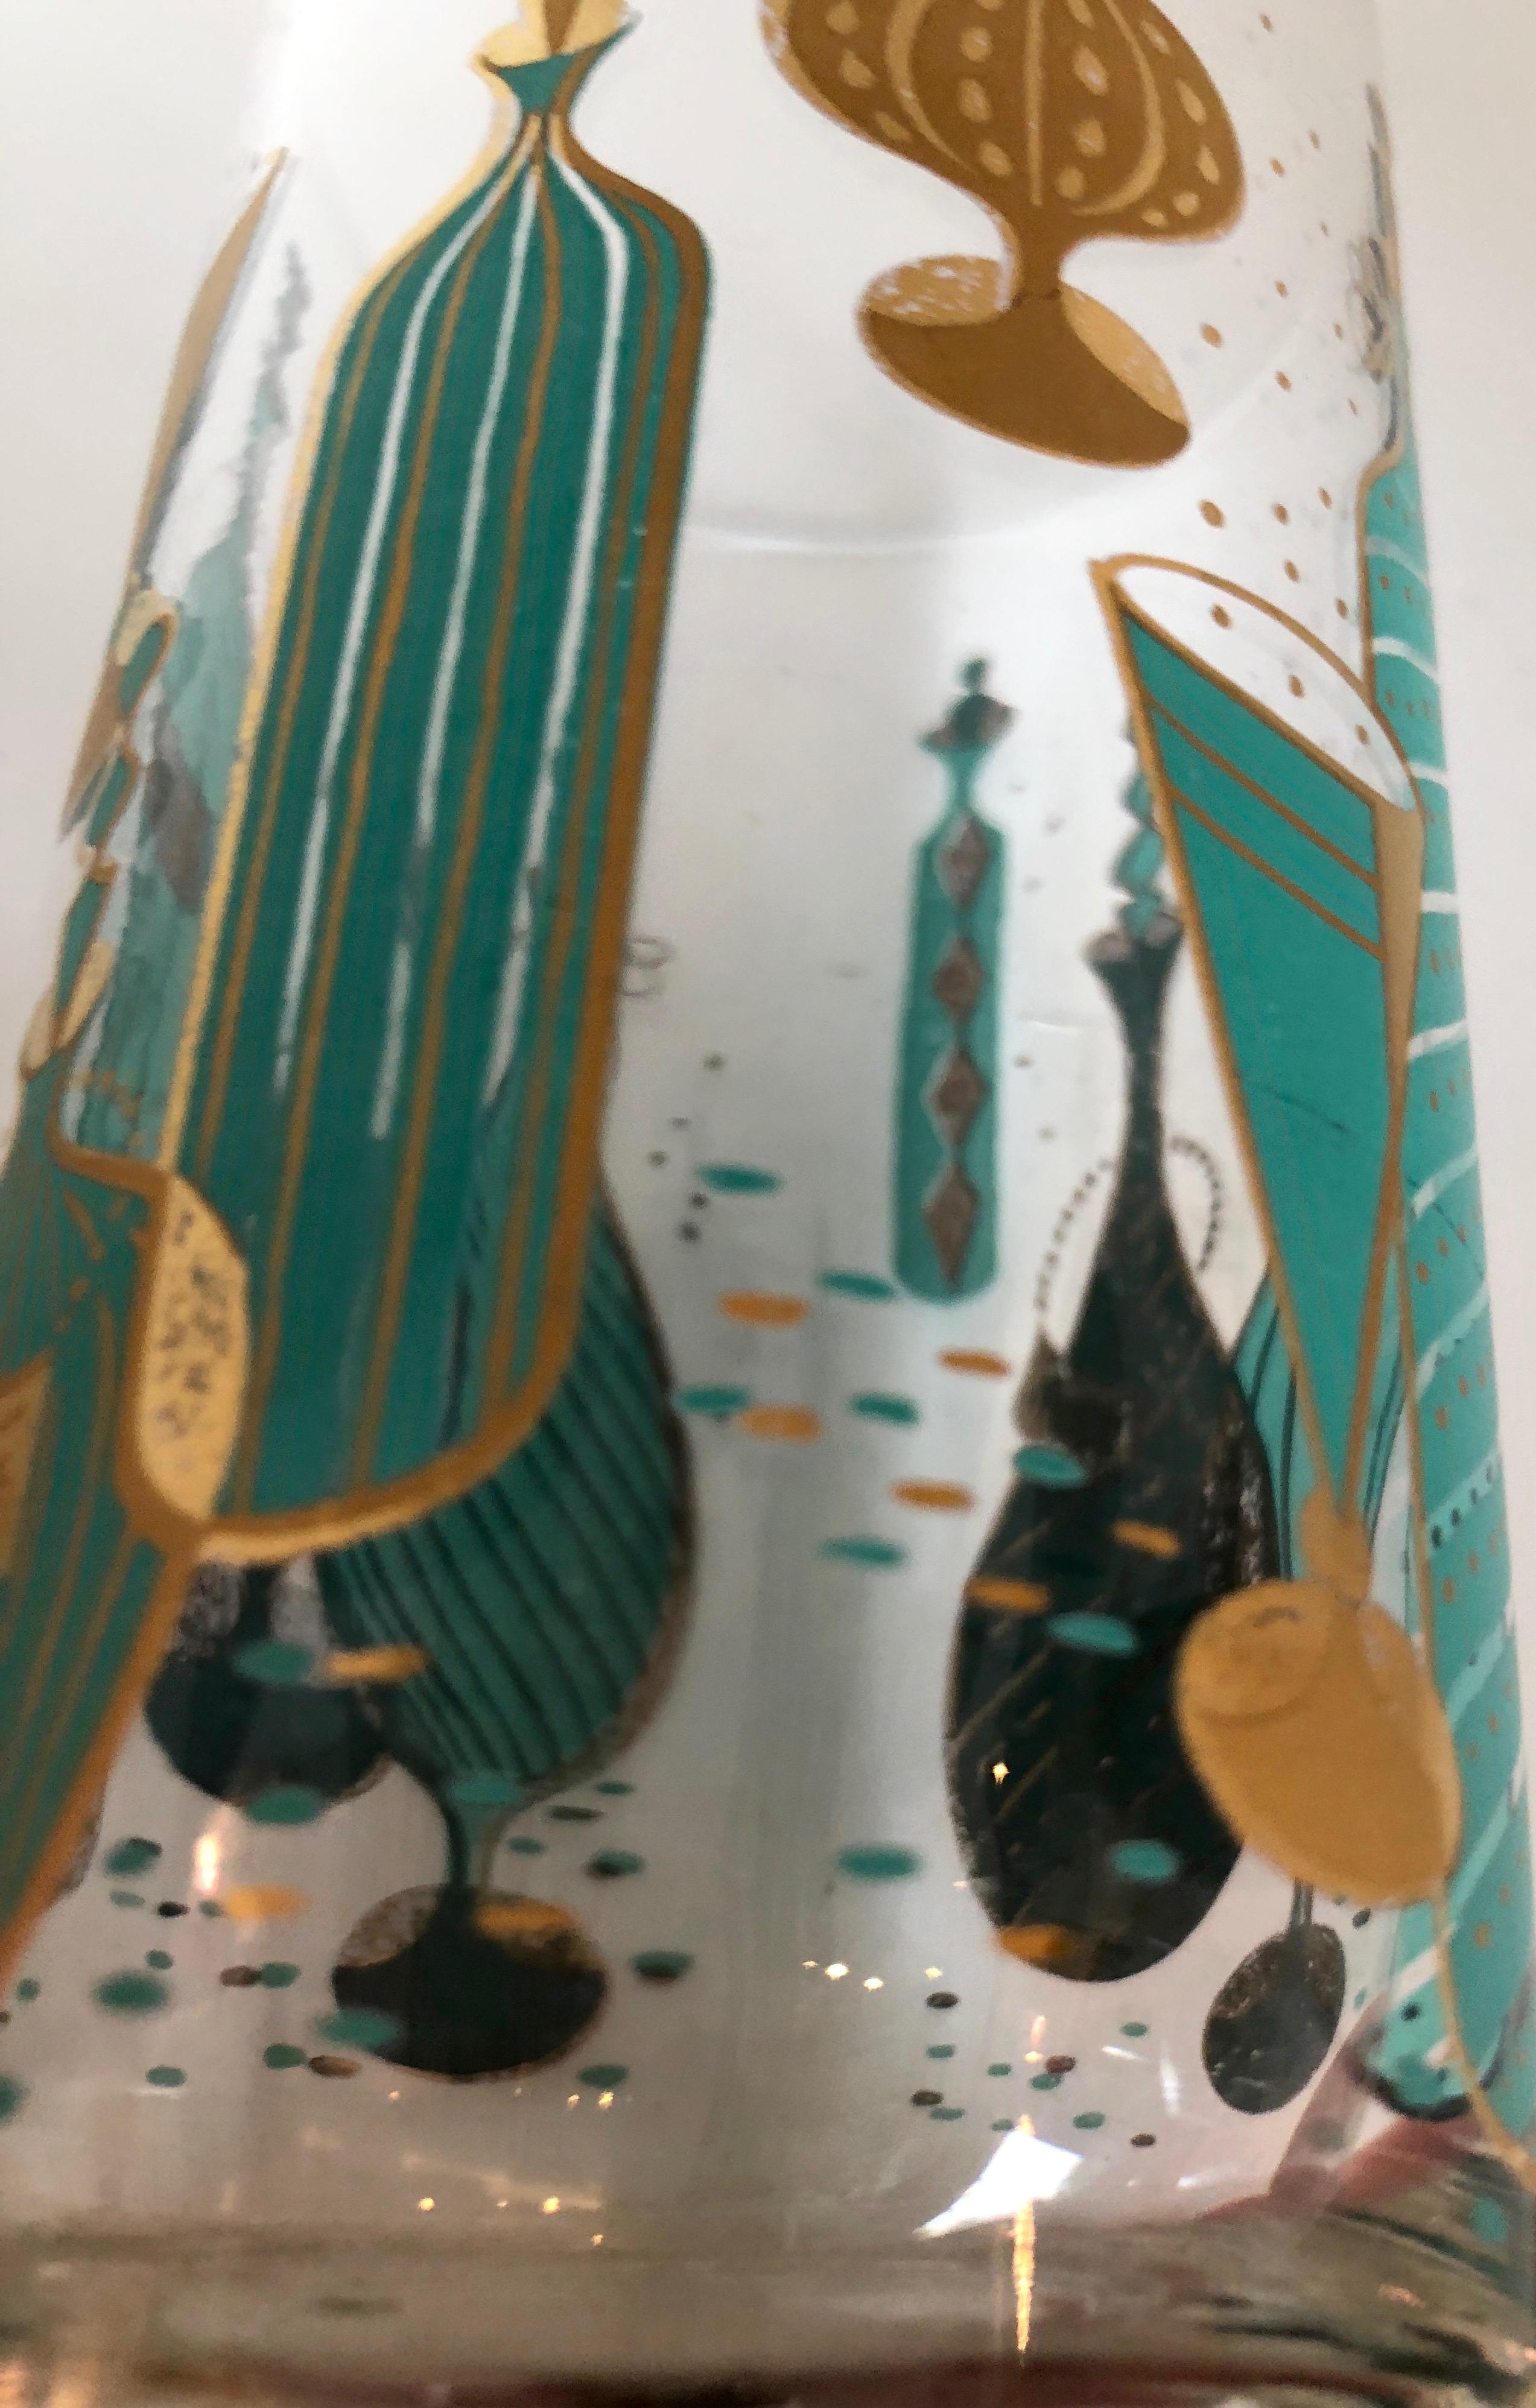 9-Piece Set of Aqua & Gold Print on Clear Glass Cocktail Glasses w/ Brass Caddy 9